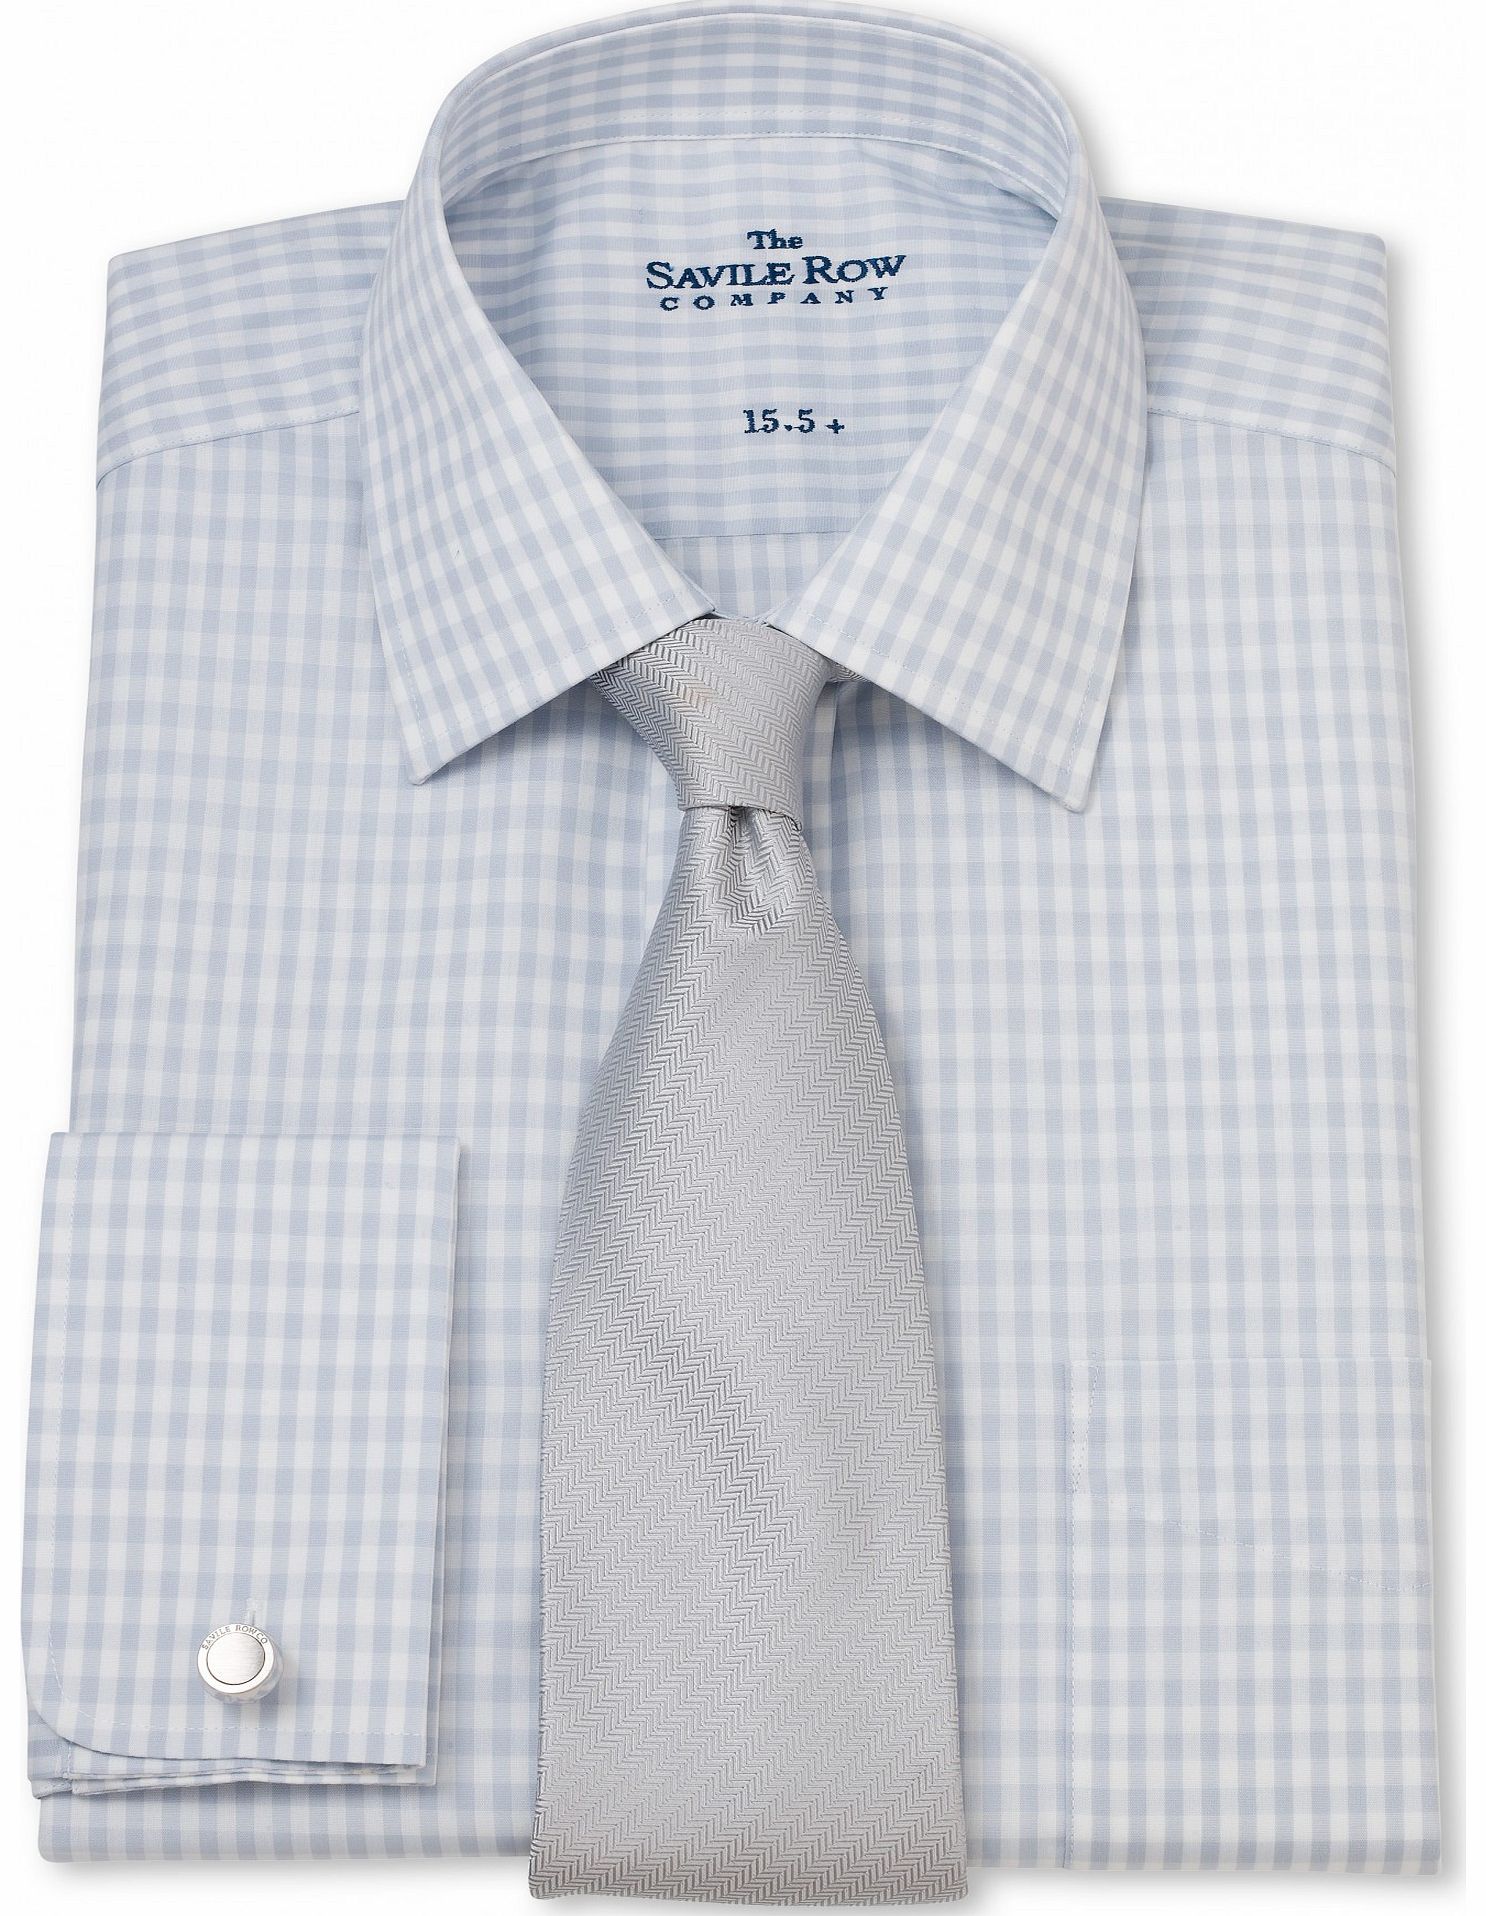 Savile Row Company Grey White Gingham Check Classic Fit Shirt 17